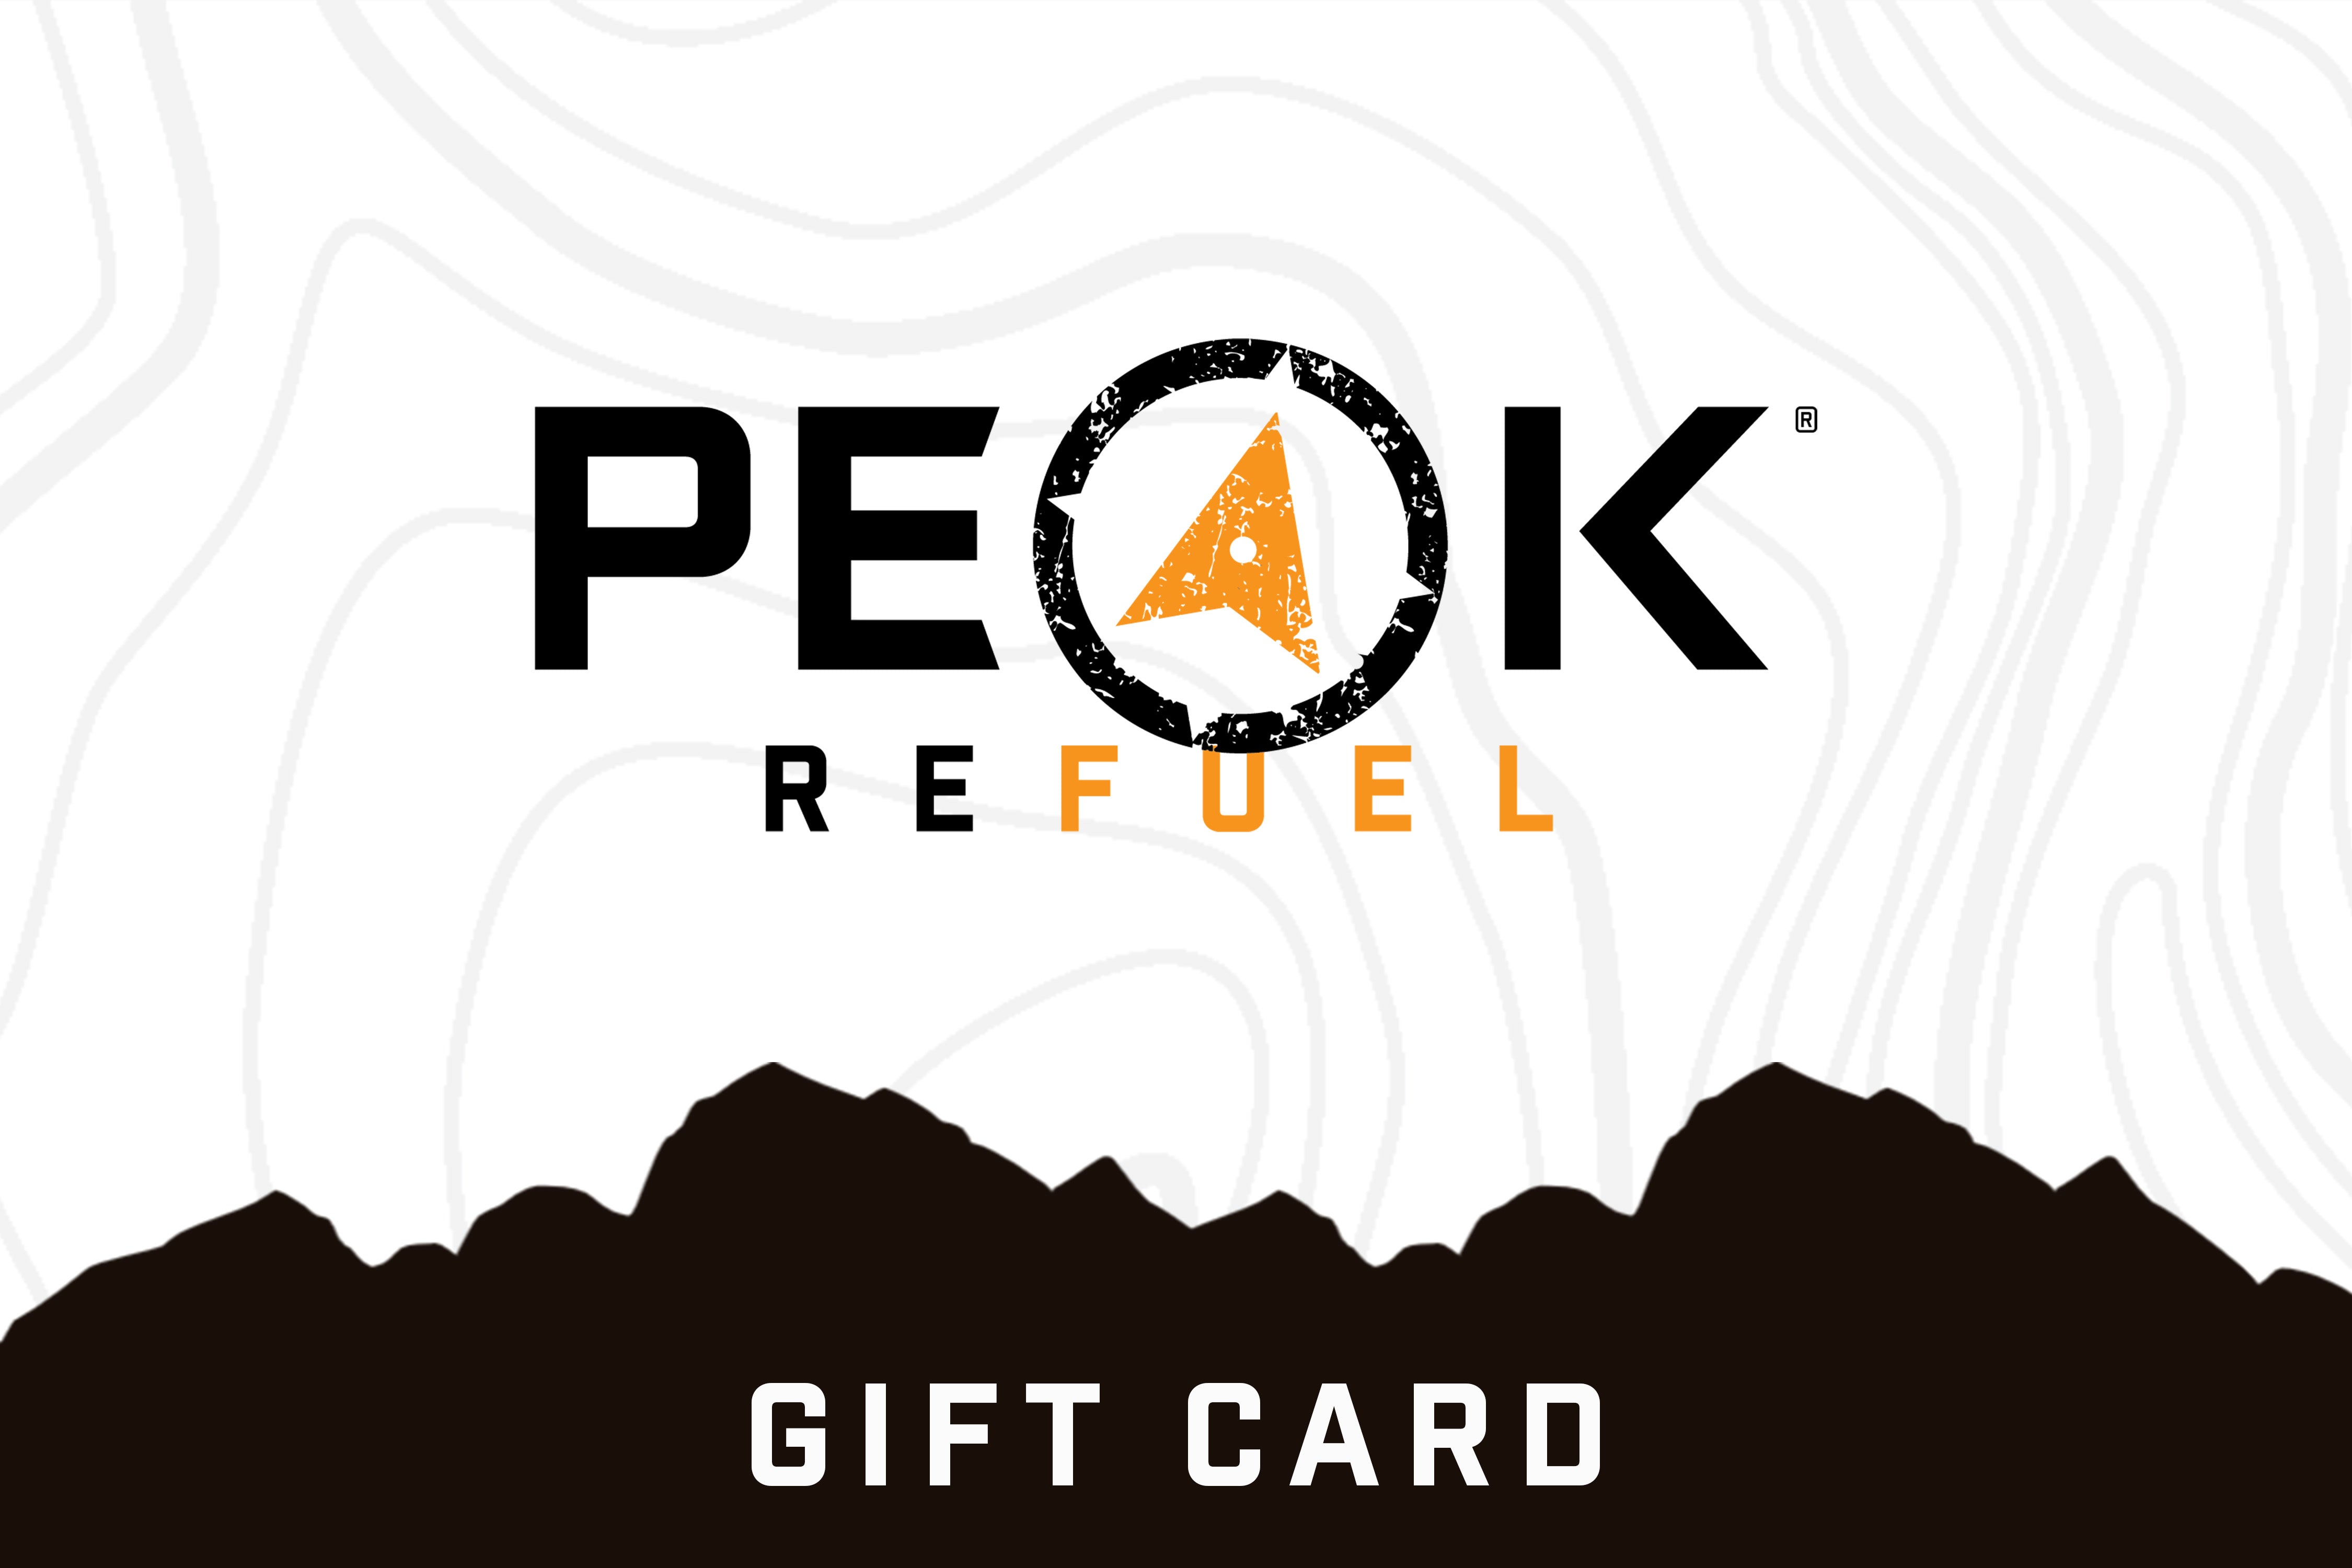 A gift card featuring a logo with a mountain in the background, a black and orange compass, and a black letter E on a white background.